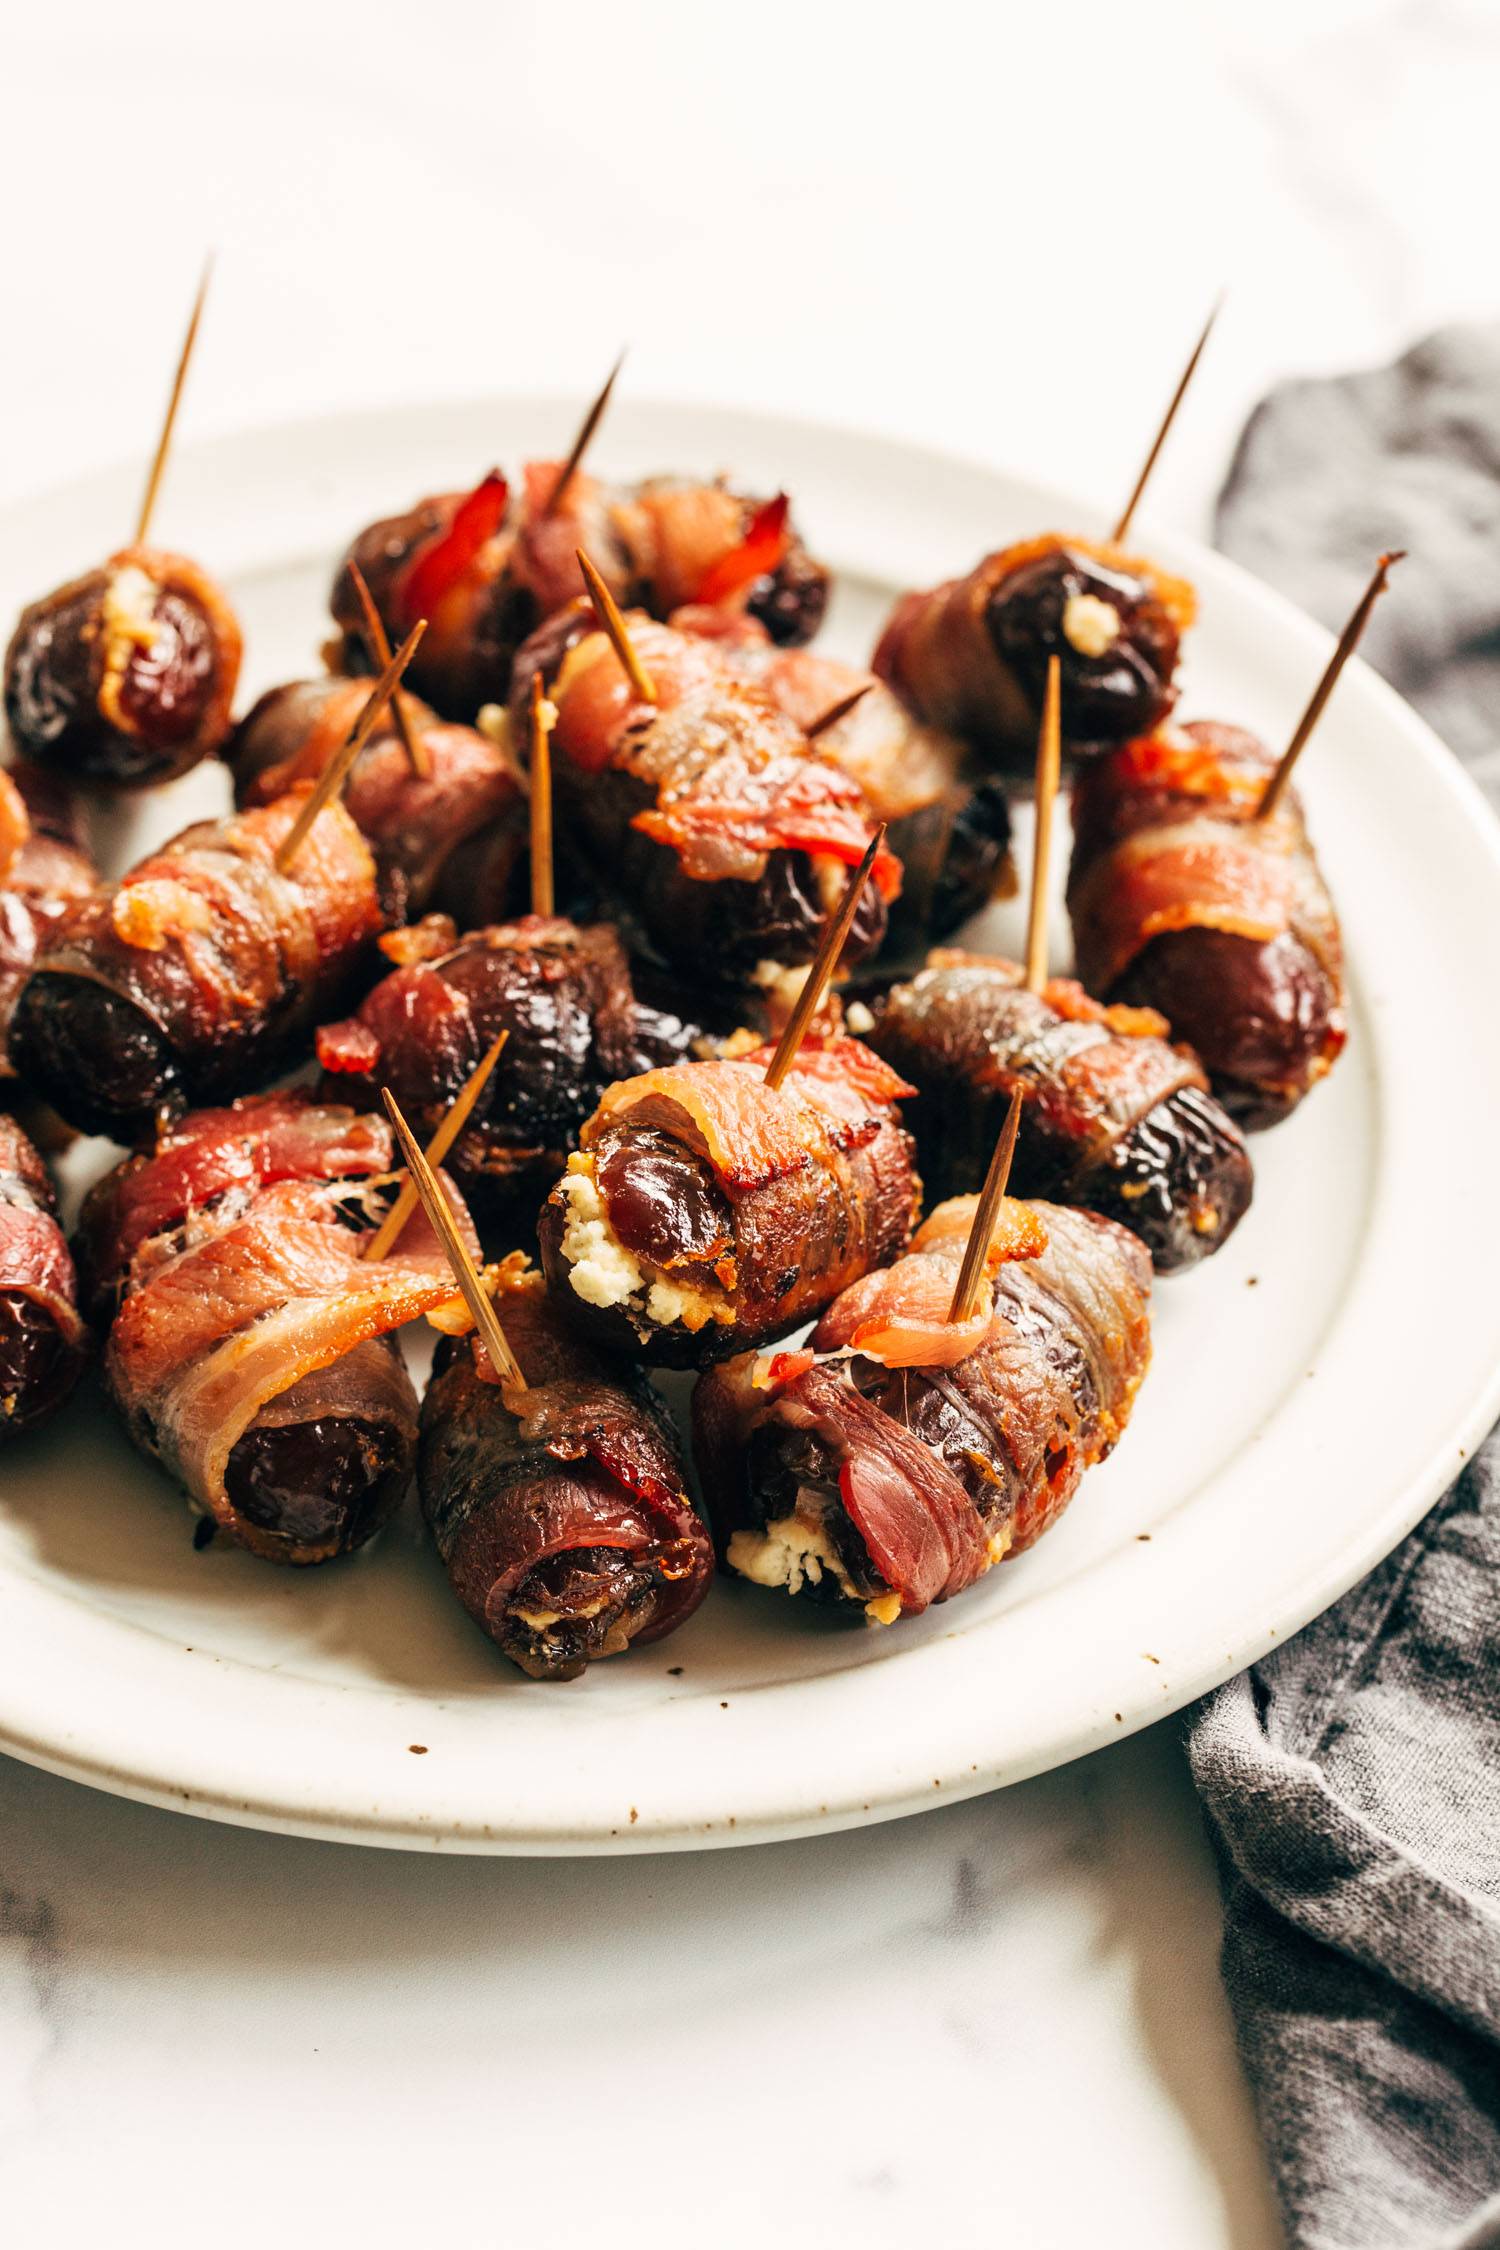 Bacon wrapped dates on a plate with toothpicks in the dates